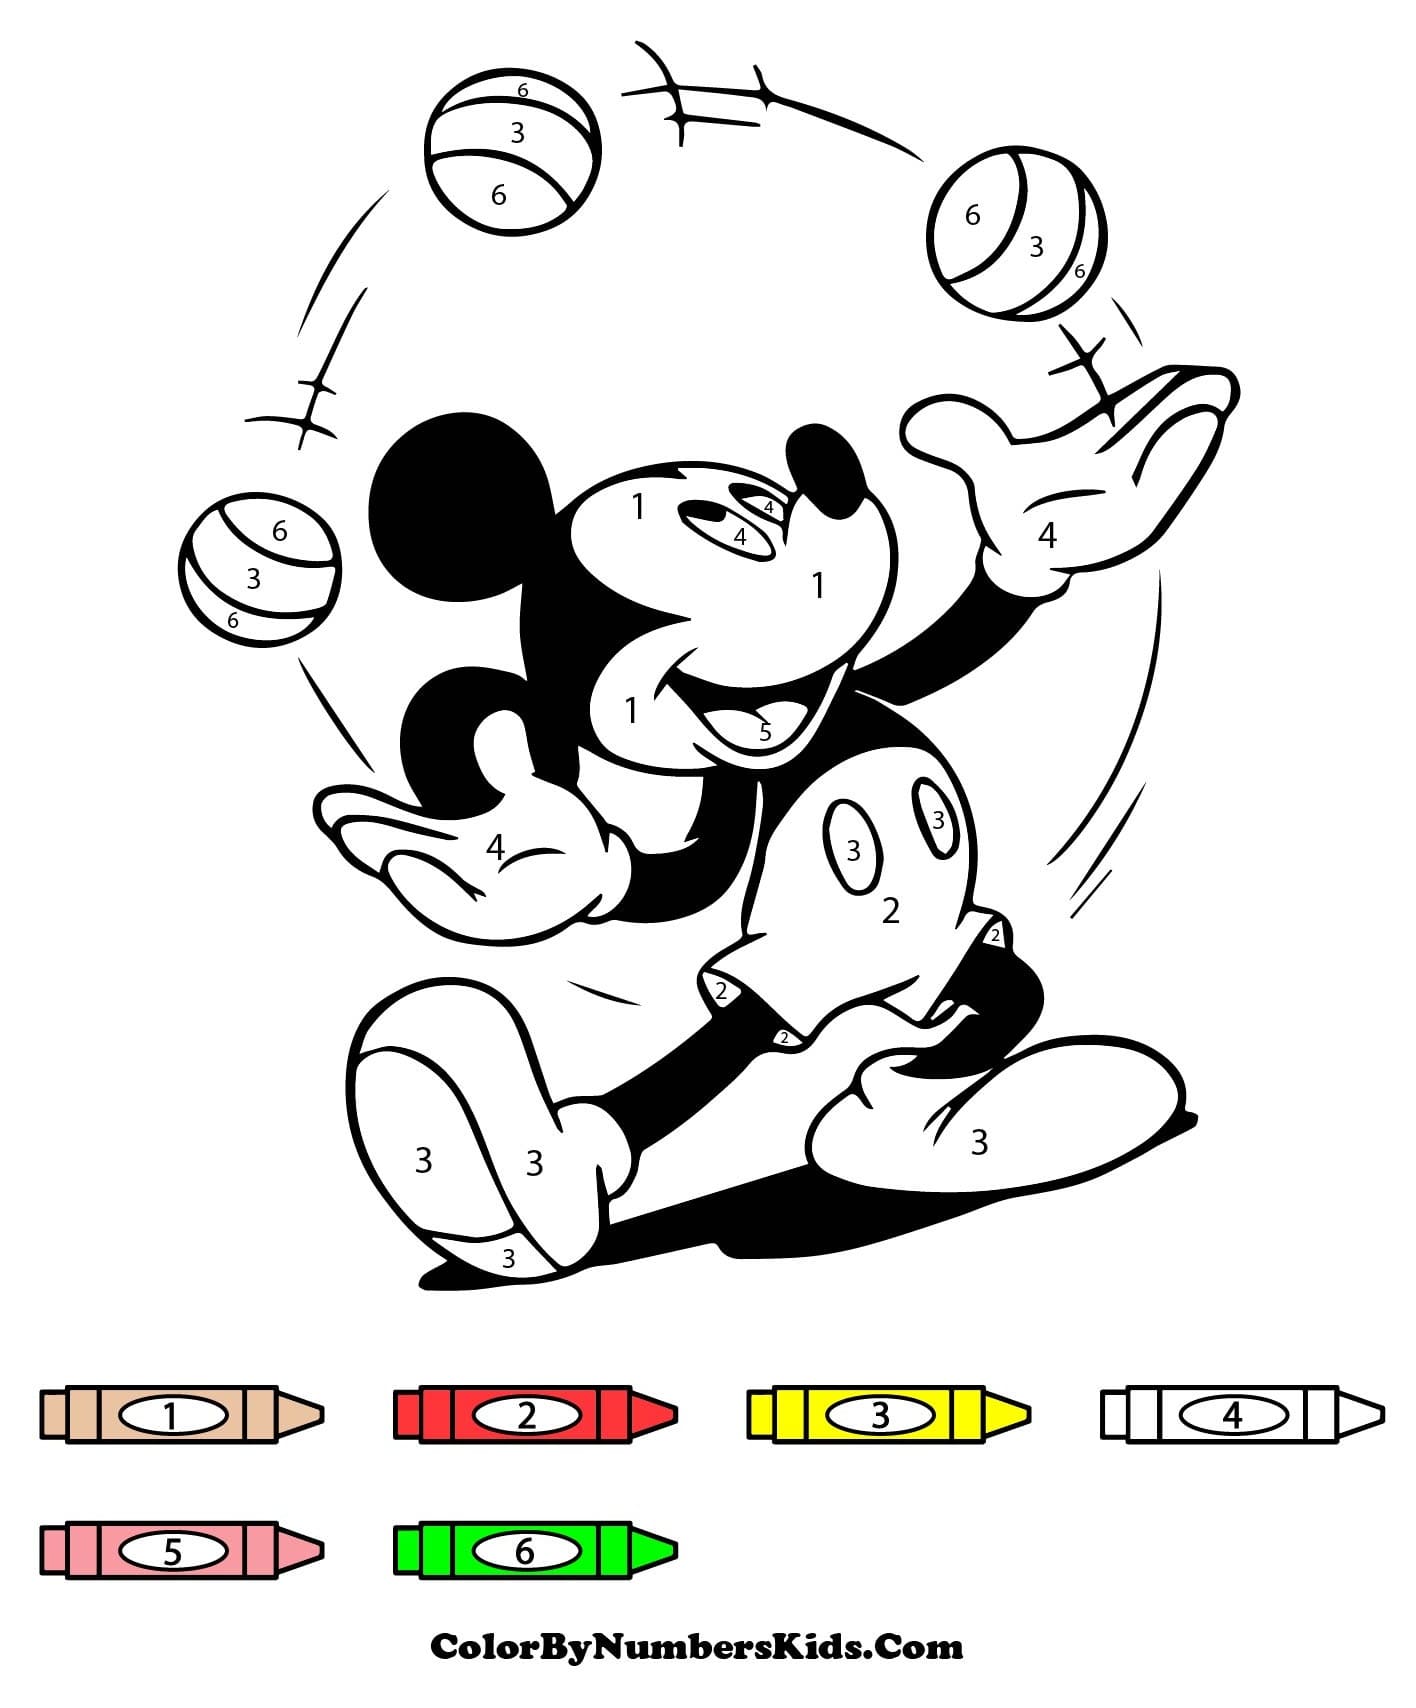 Mickey Mouse Color By Number - ColorByNumbersKids